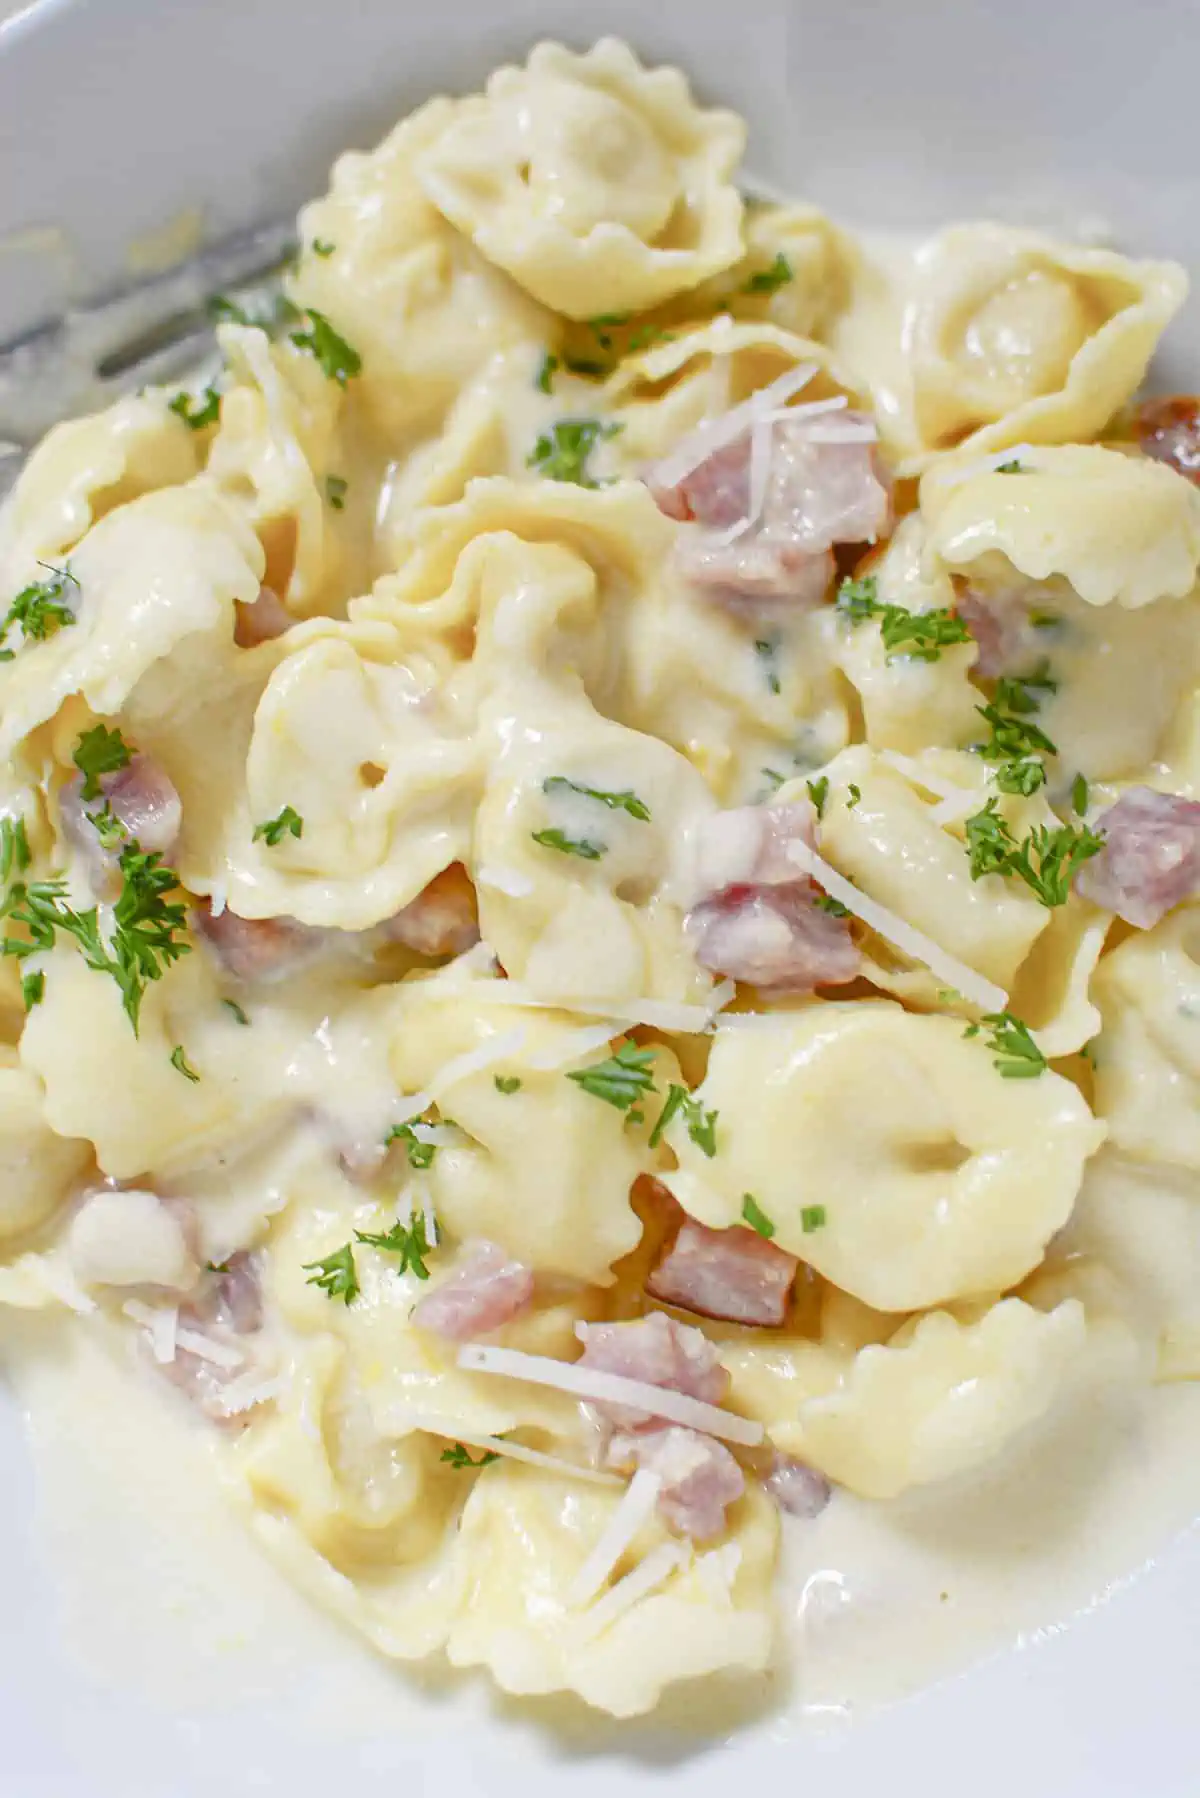 Tortellini in cream sauce, in a white bowl. Pieces of ham and shreds of parmesan cheese or mixed in and laying on top.